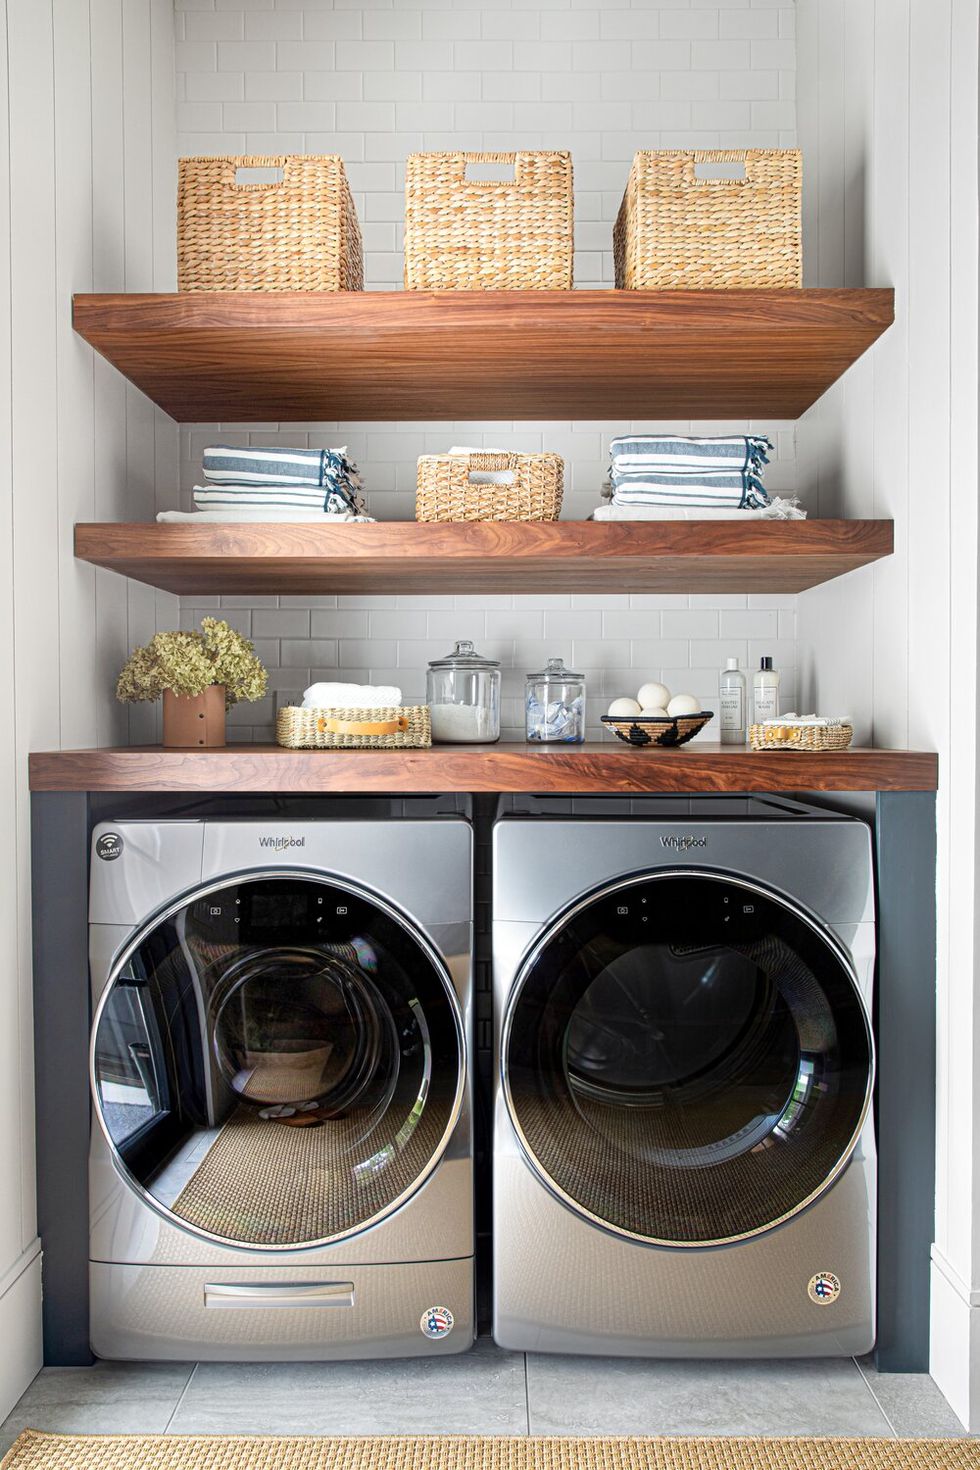 8 Tips for Laundry Room Storage